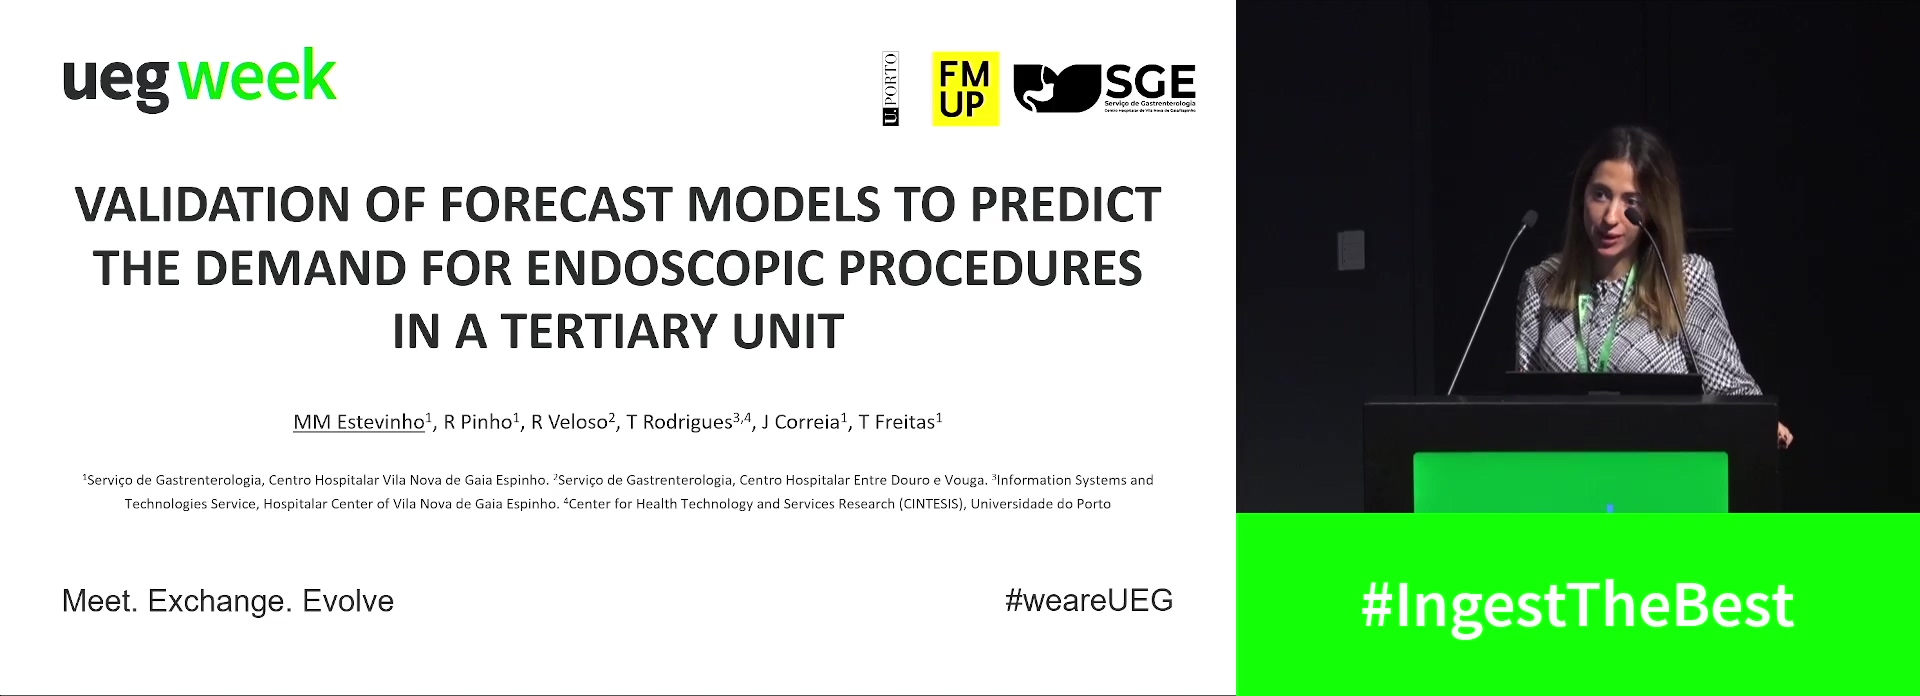 VALIDATION OF FORECAST MODELS TO PREDICT THE DEMAND FOR ENDOSCOPIC PROCEDURES IN A TERTIARY UNIT